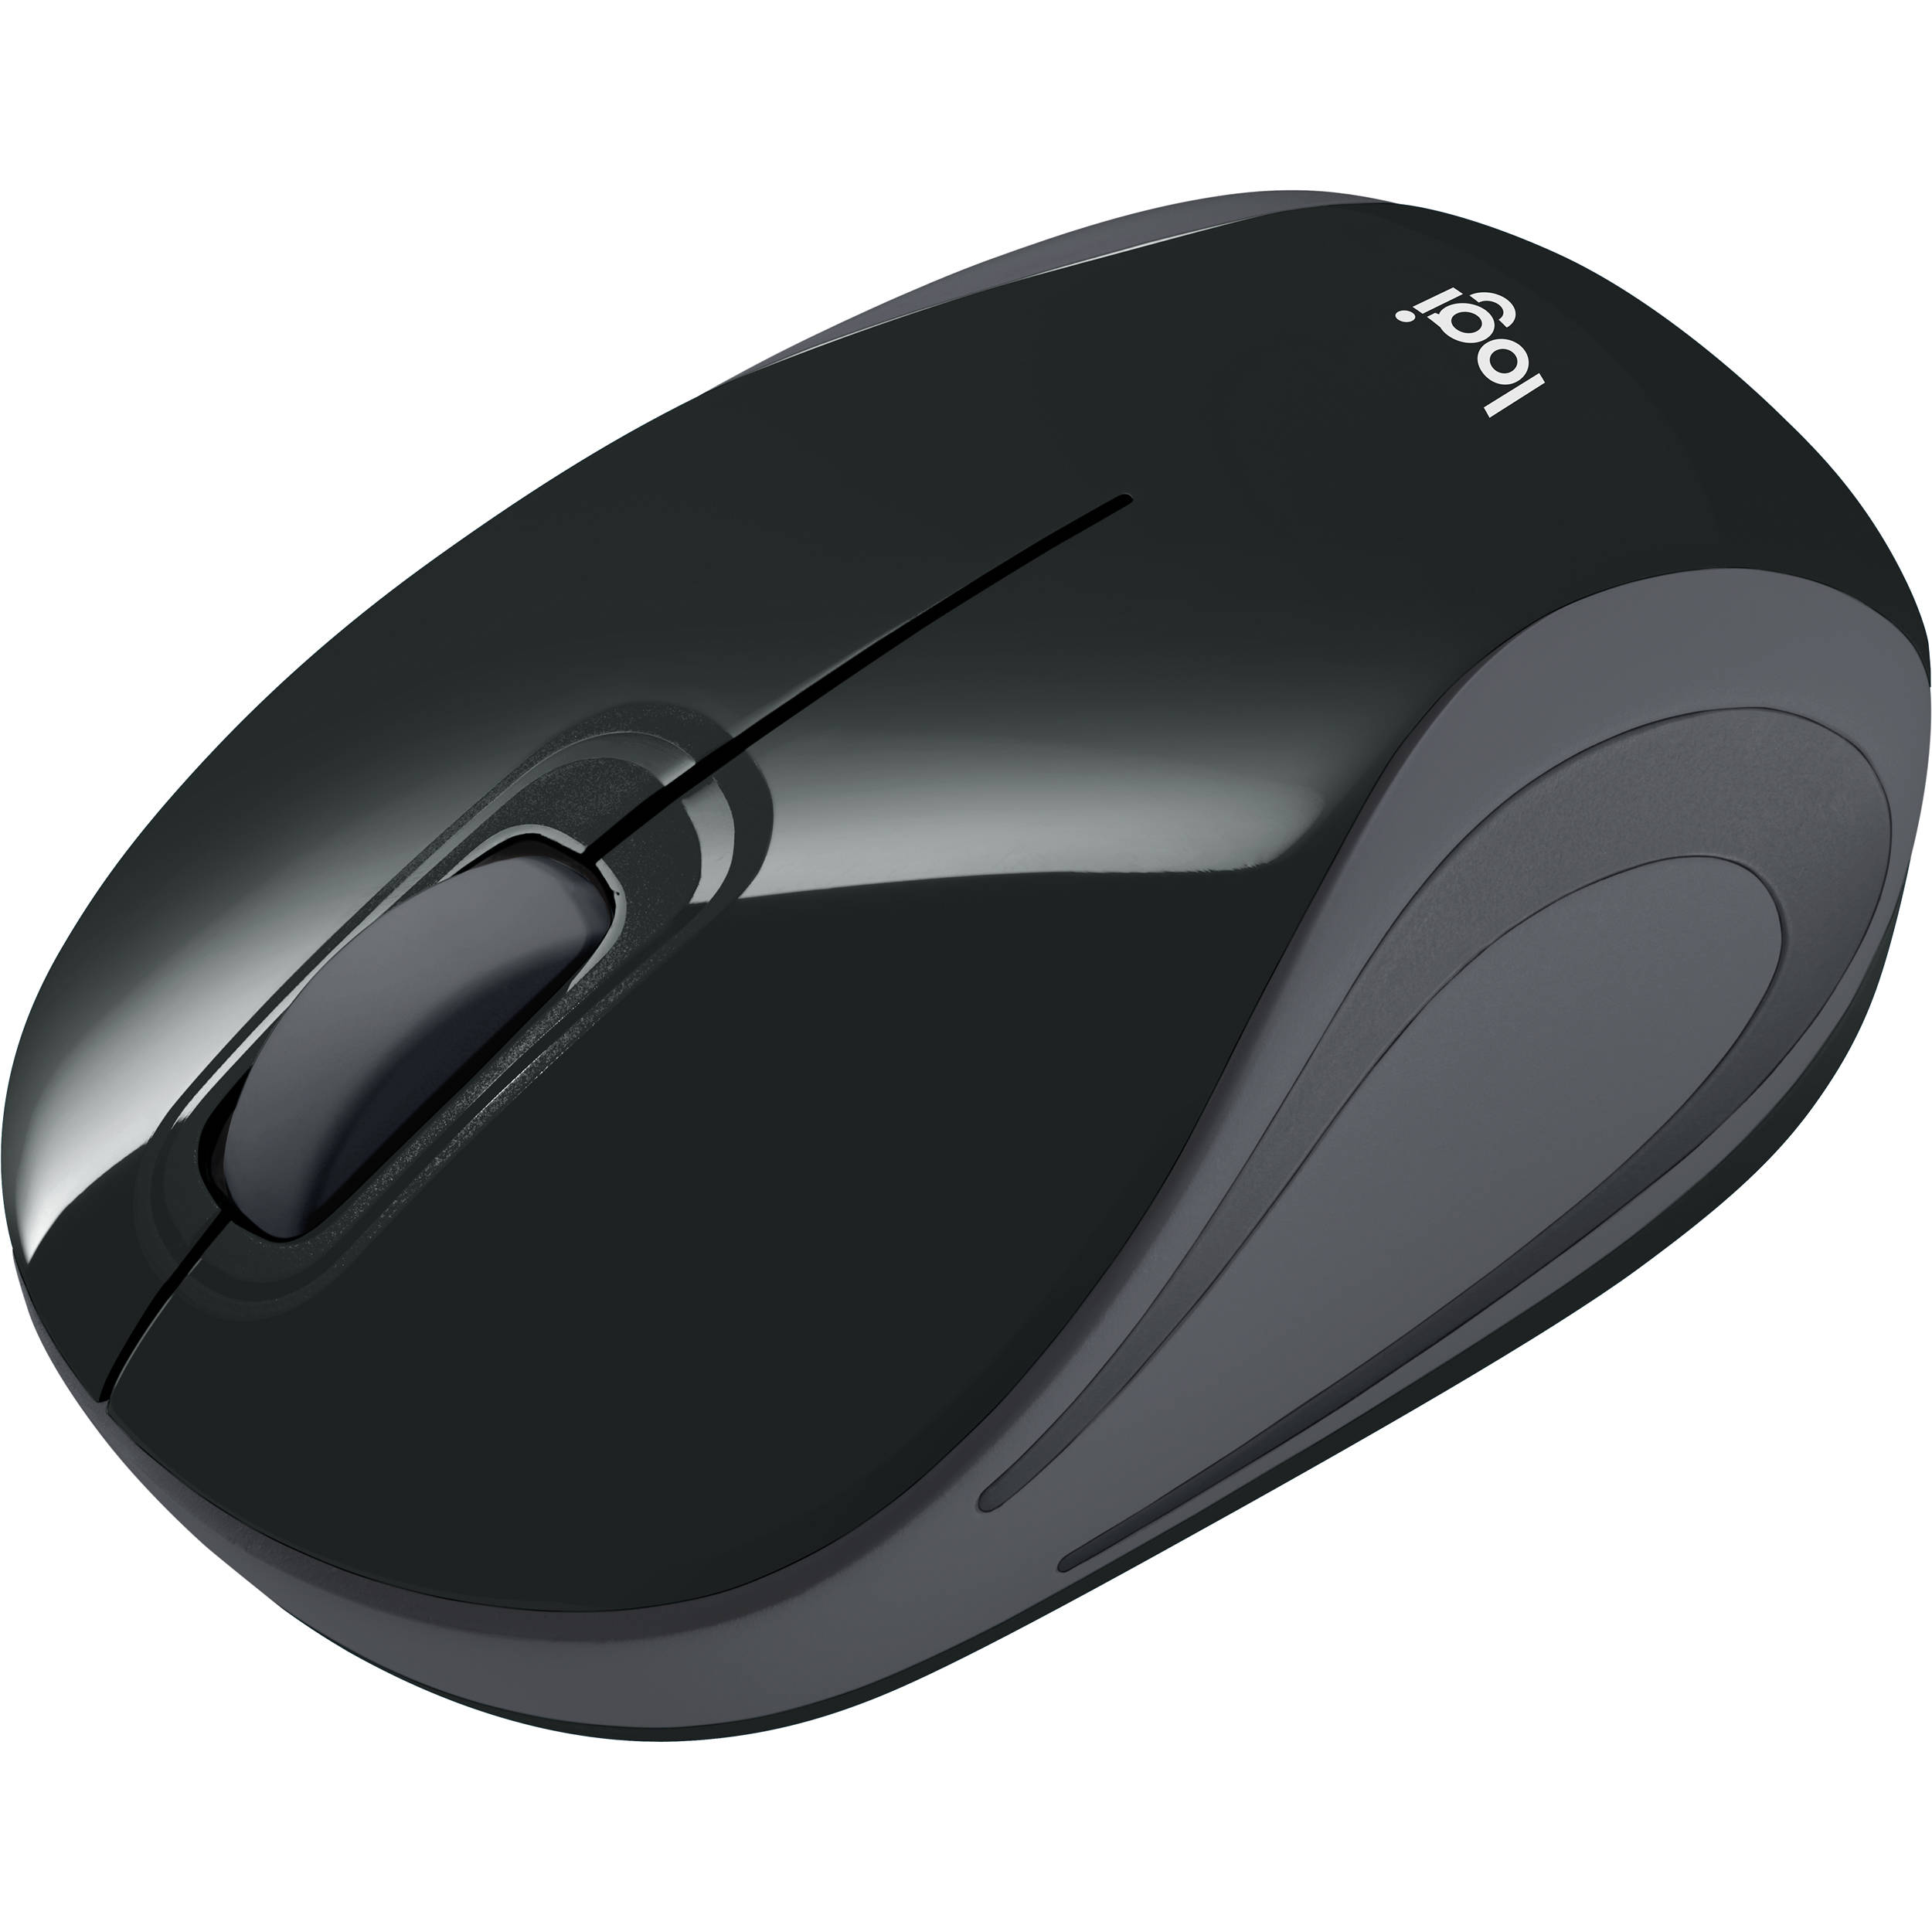 Black Mac and Linux Logitech M187 Wireless Mini Mouse for Windows